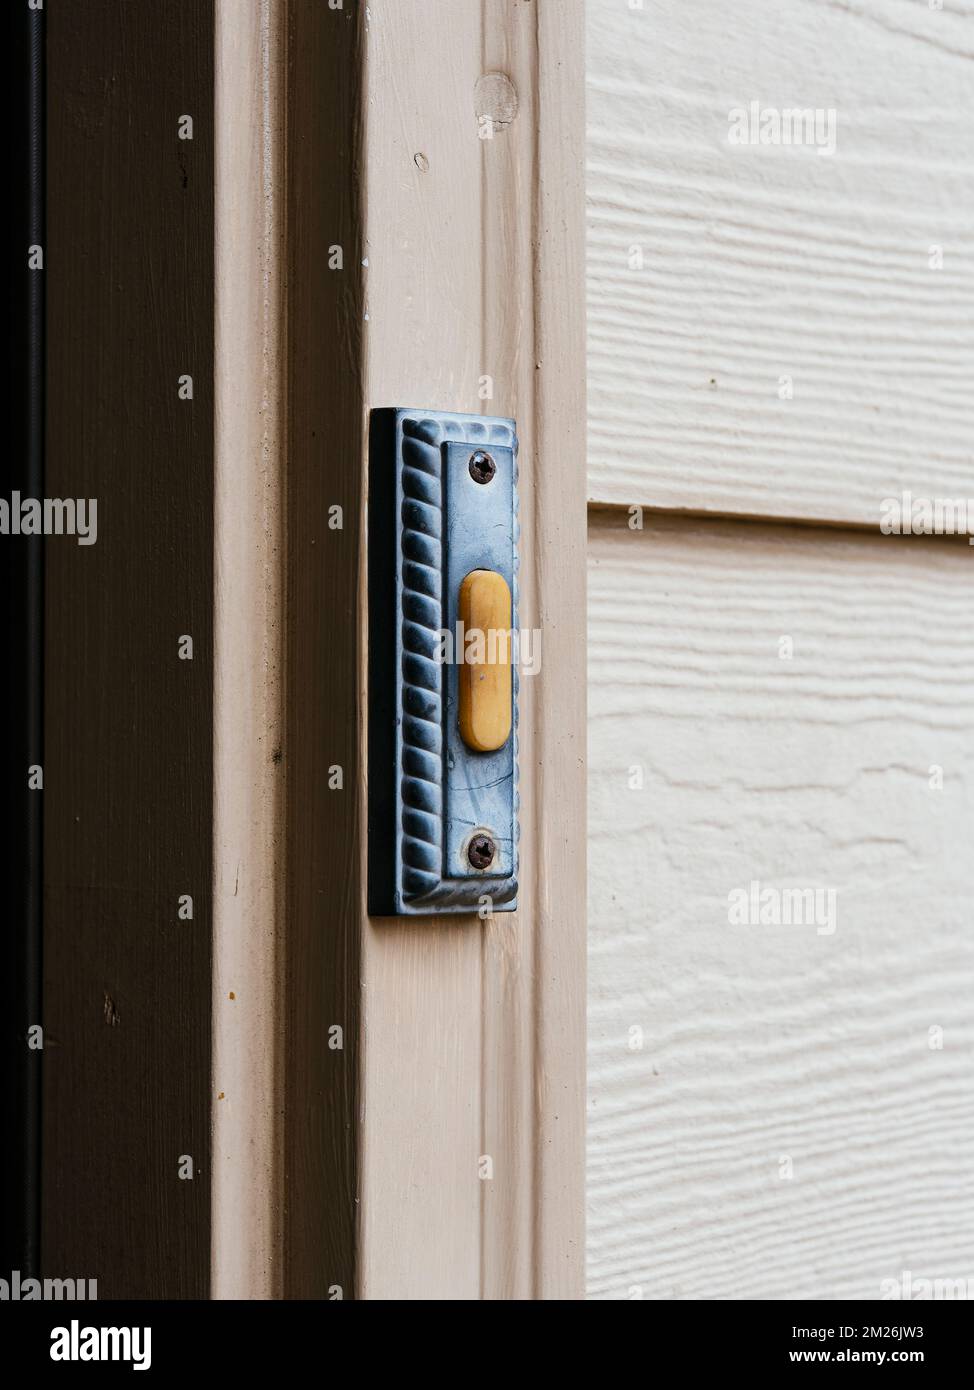 Doorbell at the front door of a residential house or home. Stock Photo